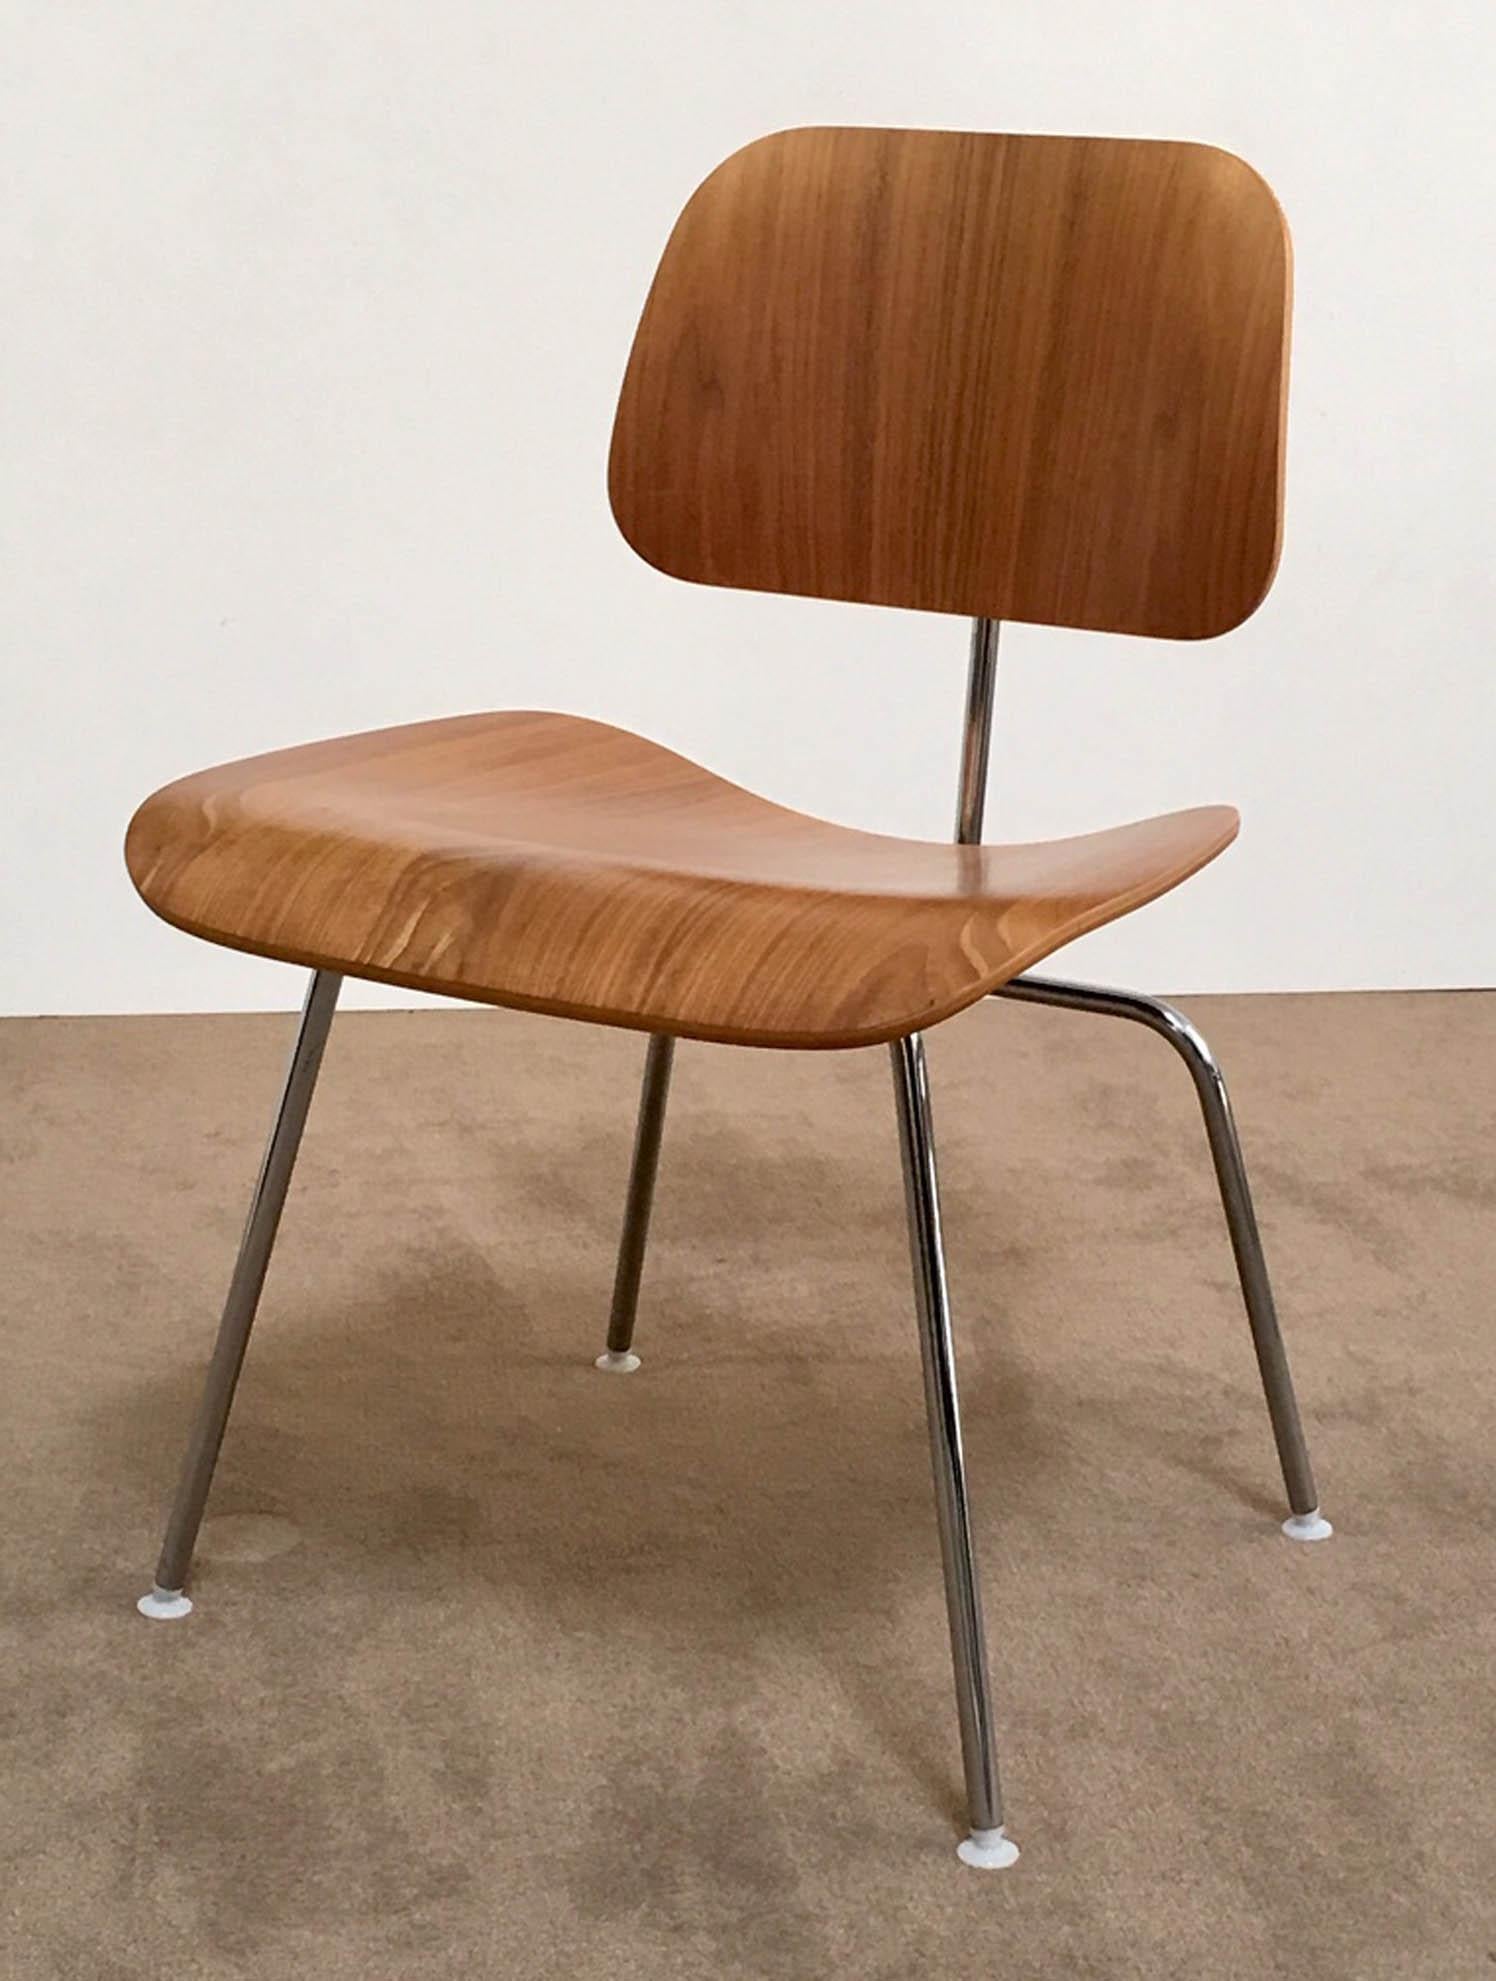 Set of 8 (DCM) dining chairs designed by Ray and Charles Eames for Herman Miller. Original labels intact (see photo)) Molded plywood, rubber mounts, metal legs, plastic feet. This is an upright chair perfect for dining. Sold as a set. Price is for